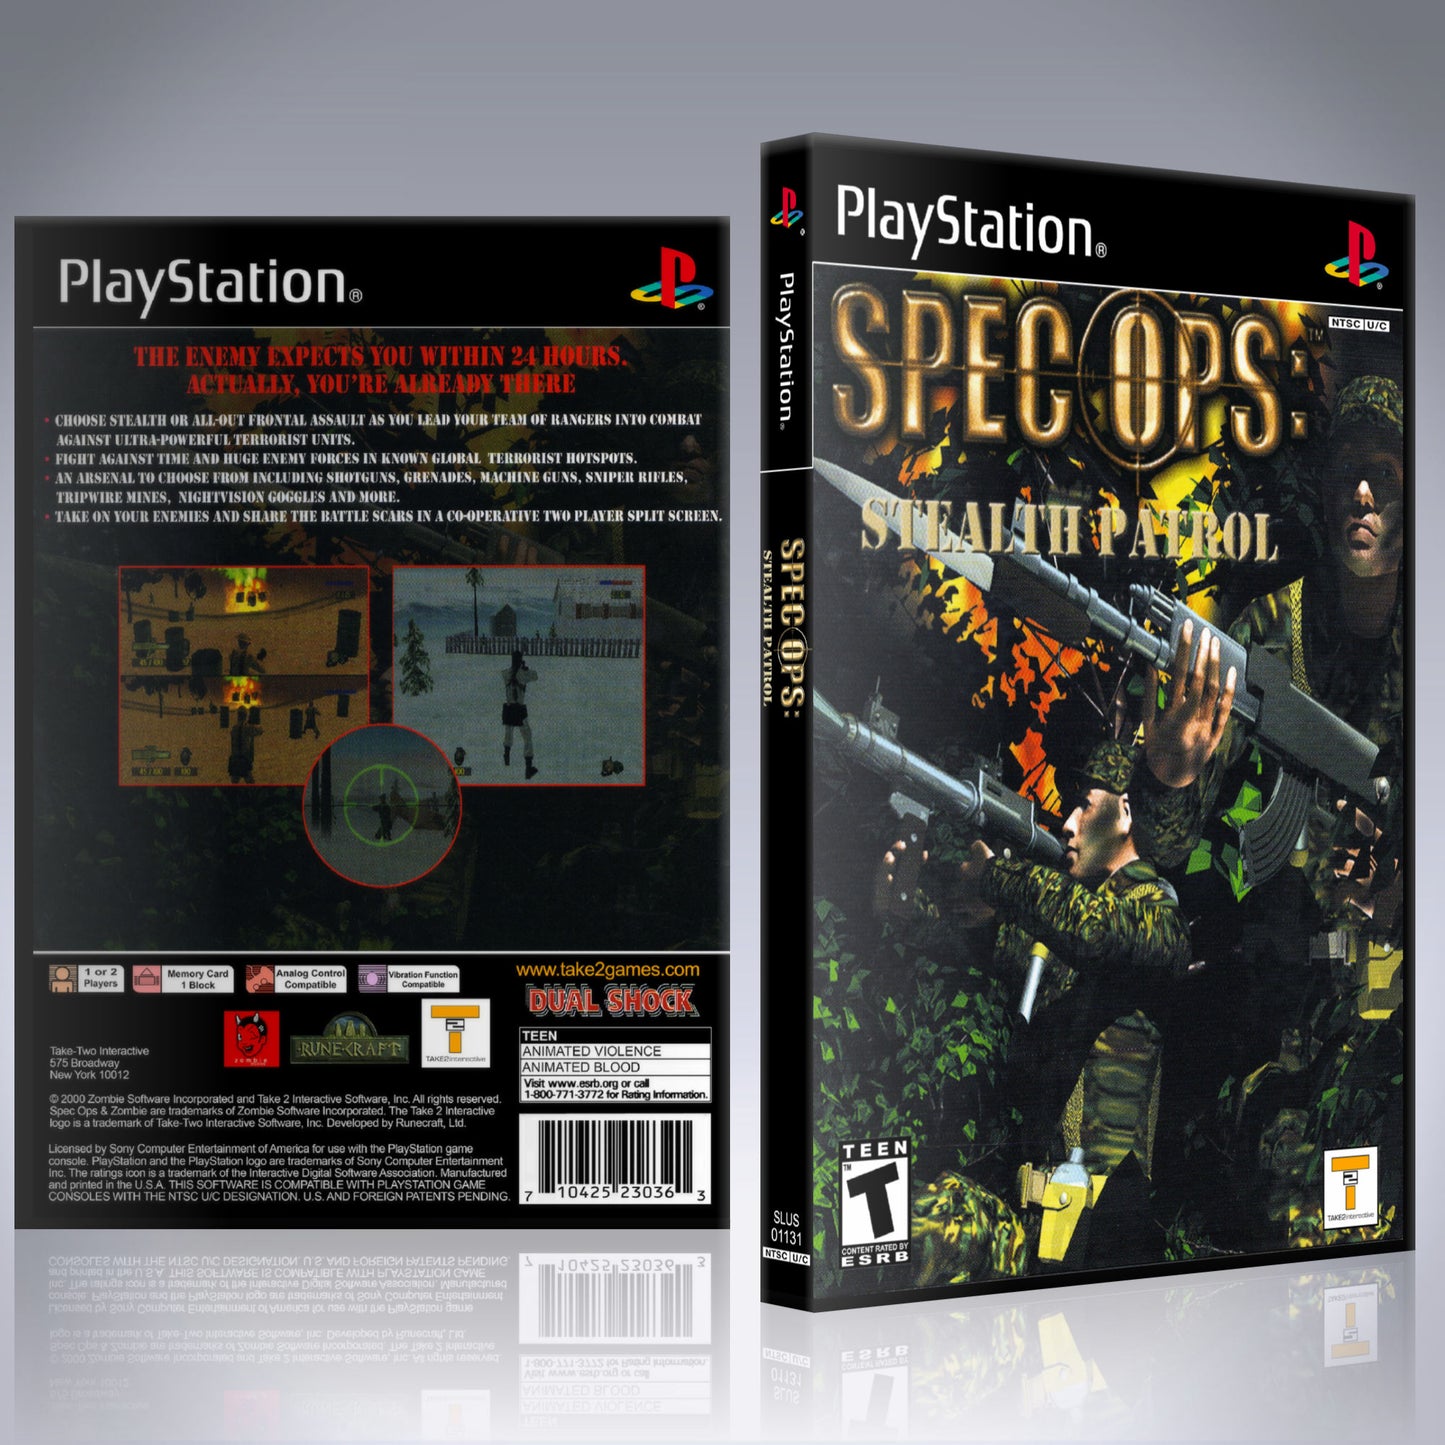 PS1 Case - NO GAME - Spec Ops - Stealth Patrol